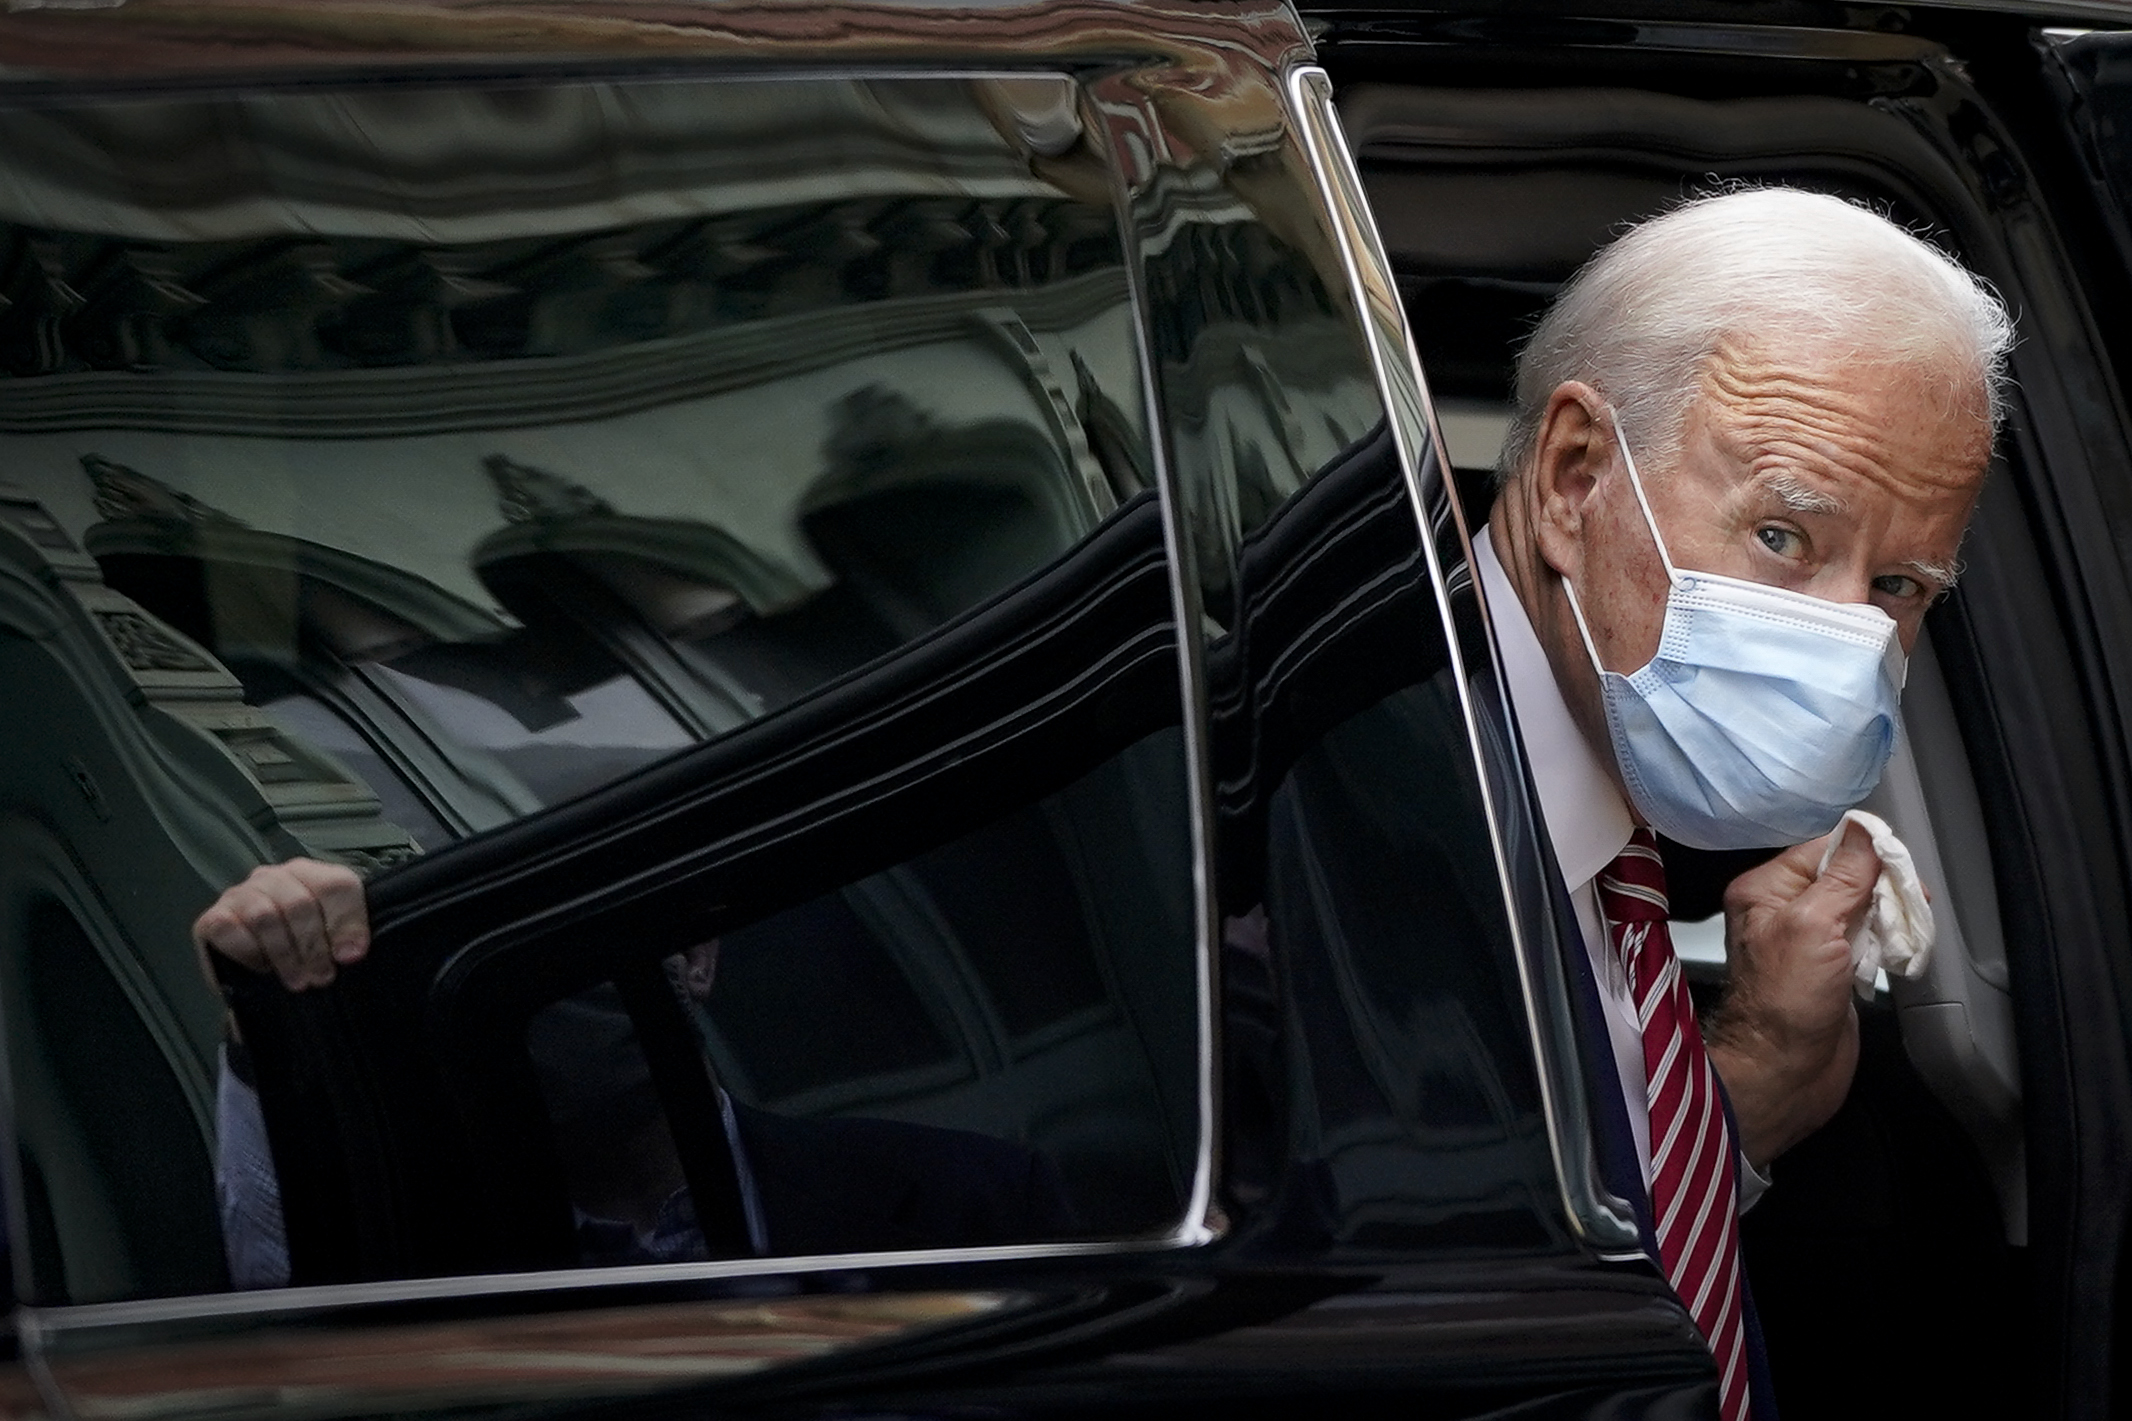 President Biden, wearing a blue mask and a dark suit, gets out of a black vehicle, looking past its door into the camera.